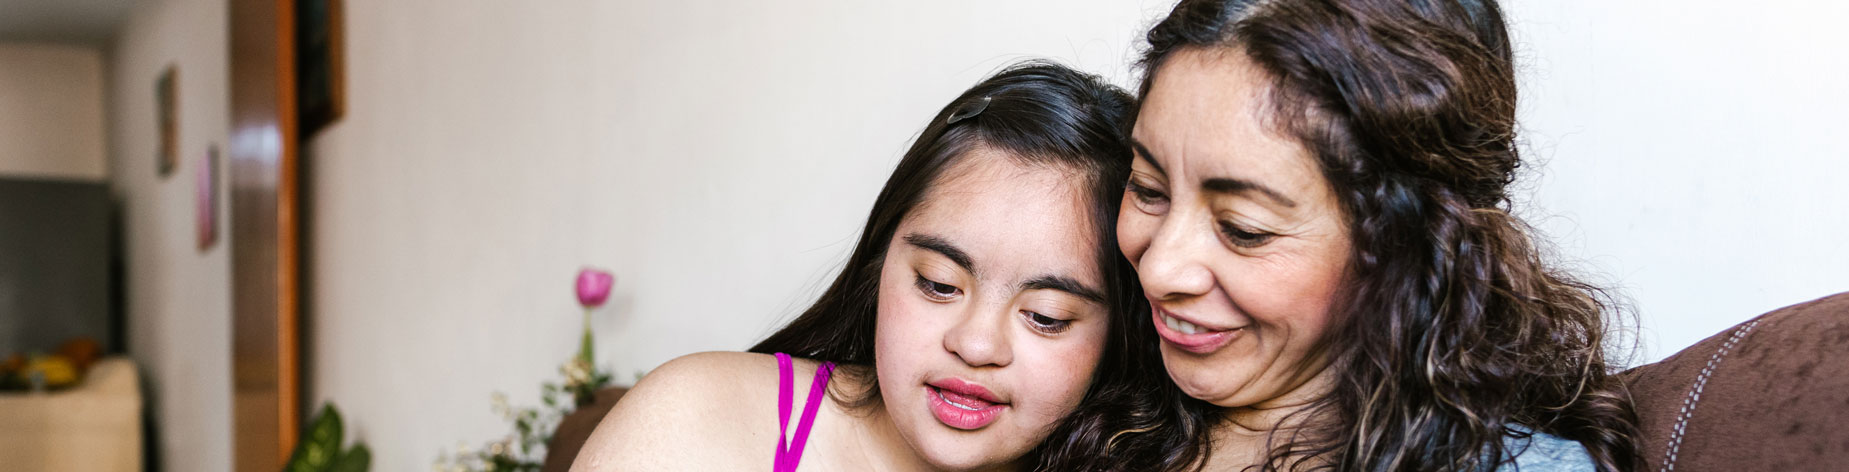 Image of mother and daughter smiling. The daughter has a mental disability.